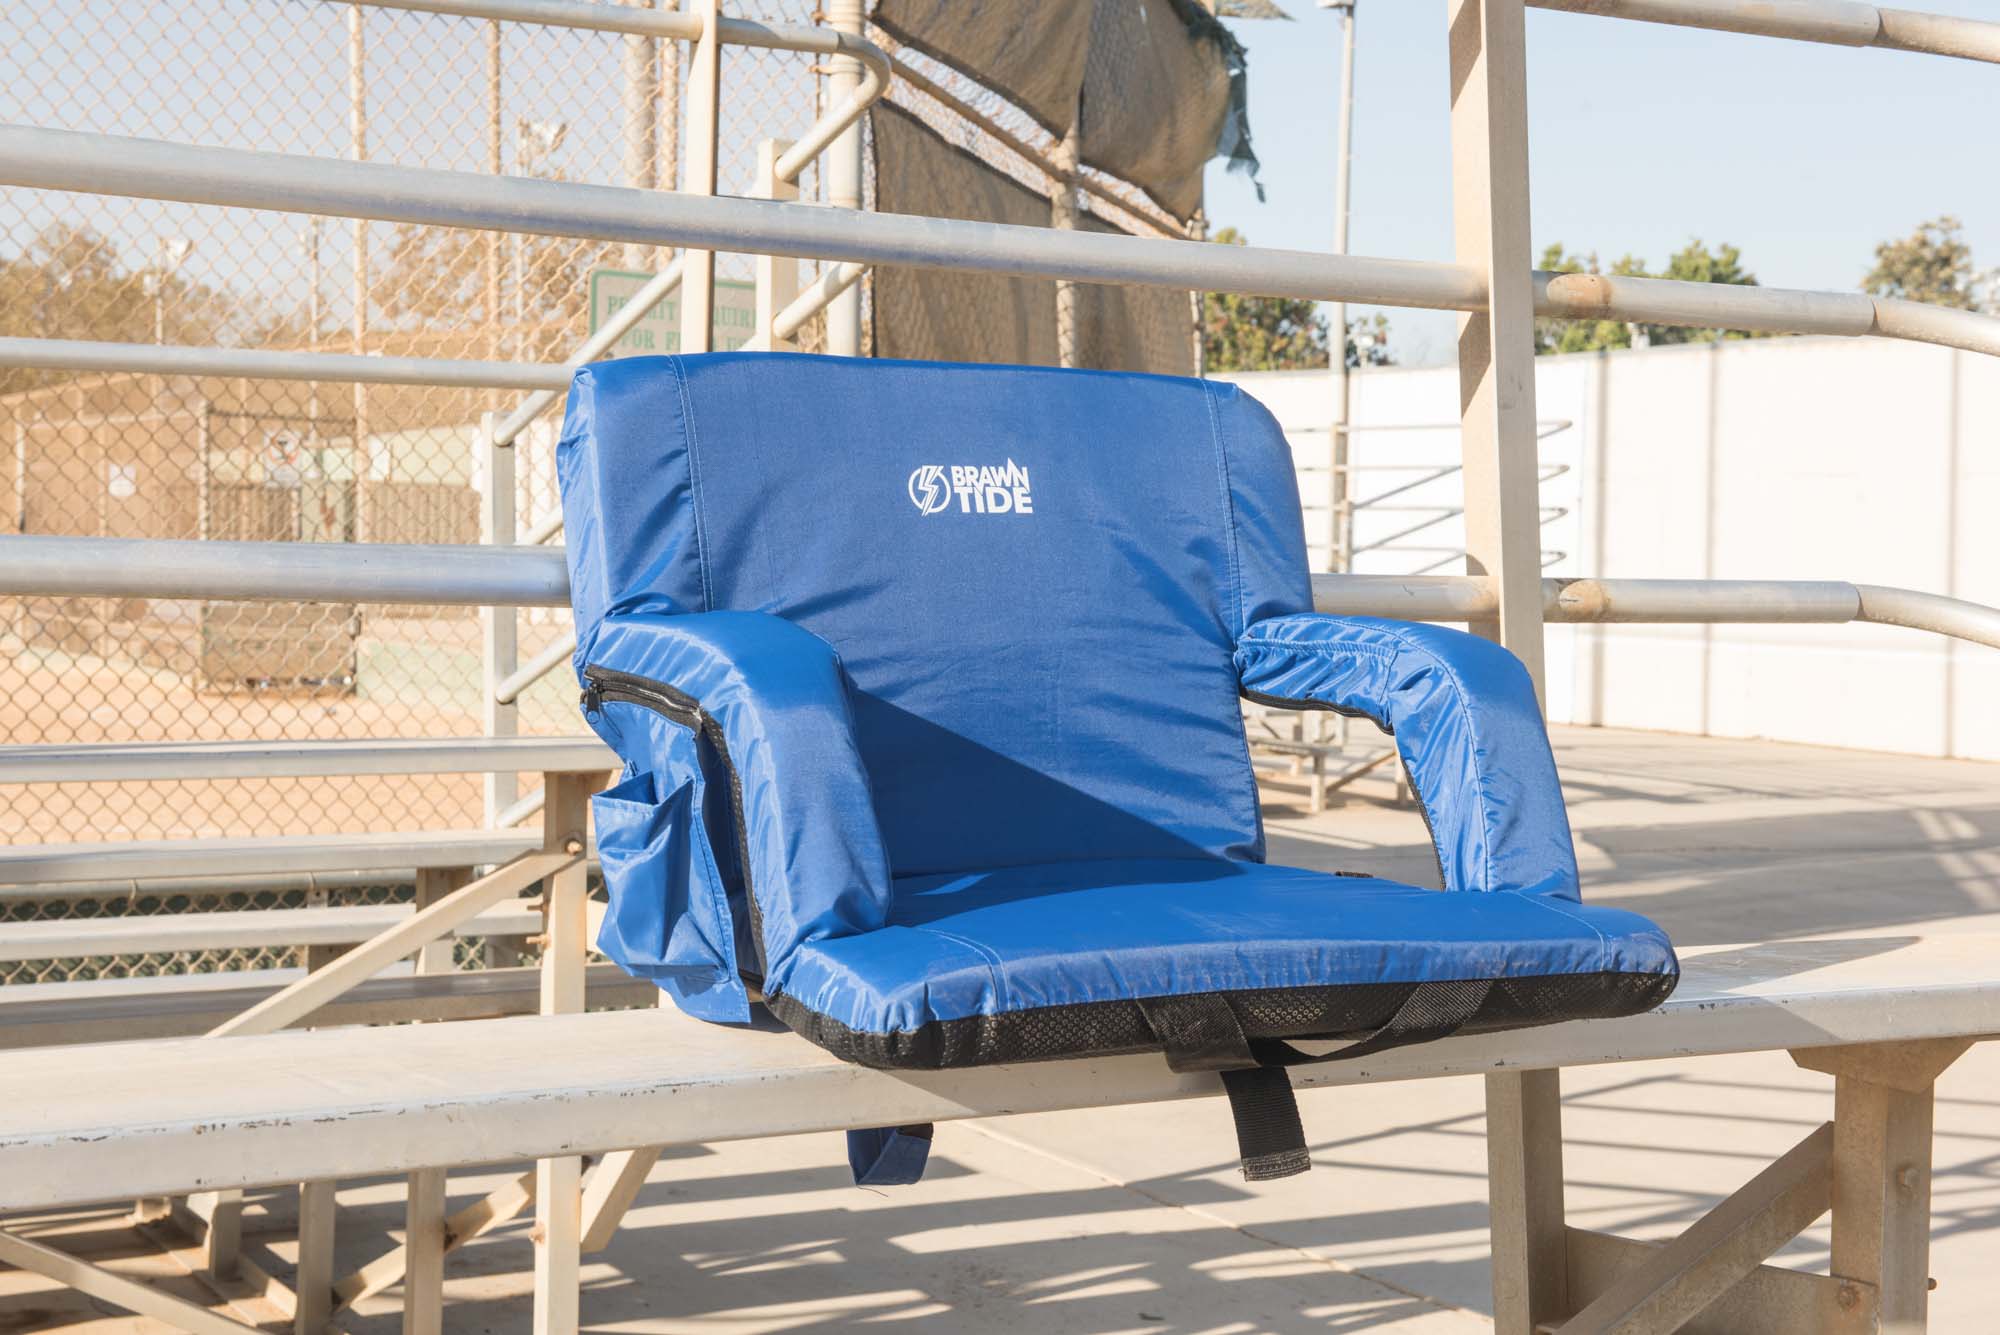 Extra Wide KKA Stadium Seats for Bleachers with Back Support Portable Bleacher Chair for Outdoor Picnic Plenty of Pockets Easy to Carry Adjustable Back Armrests Thick Padded